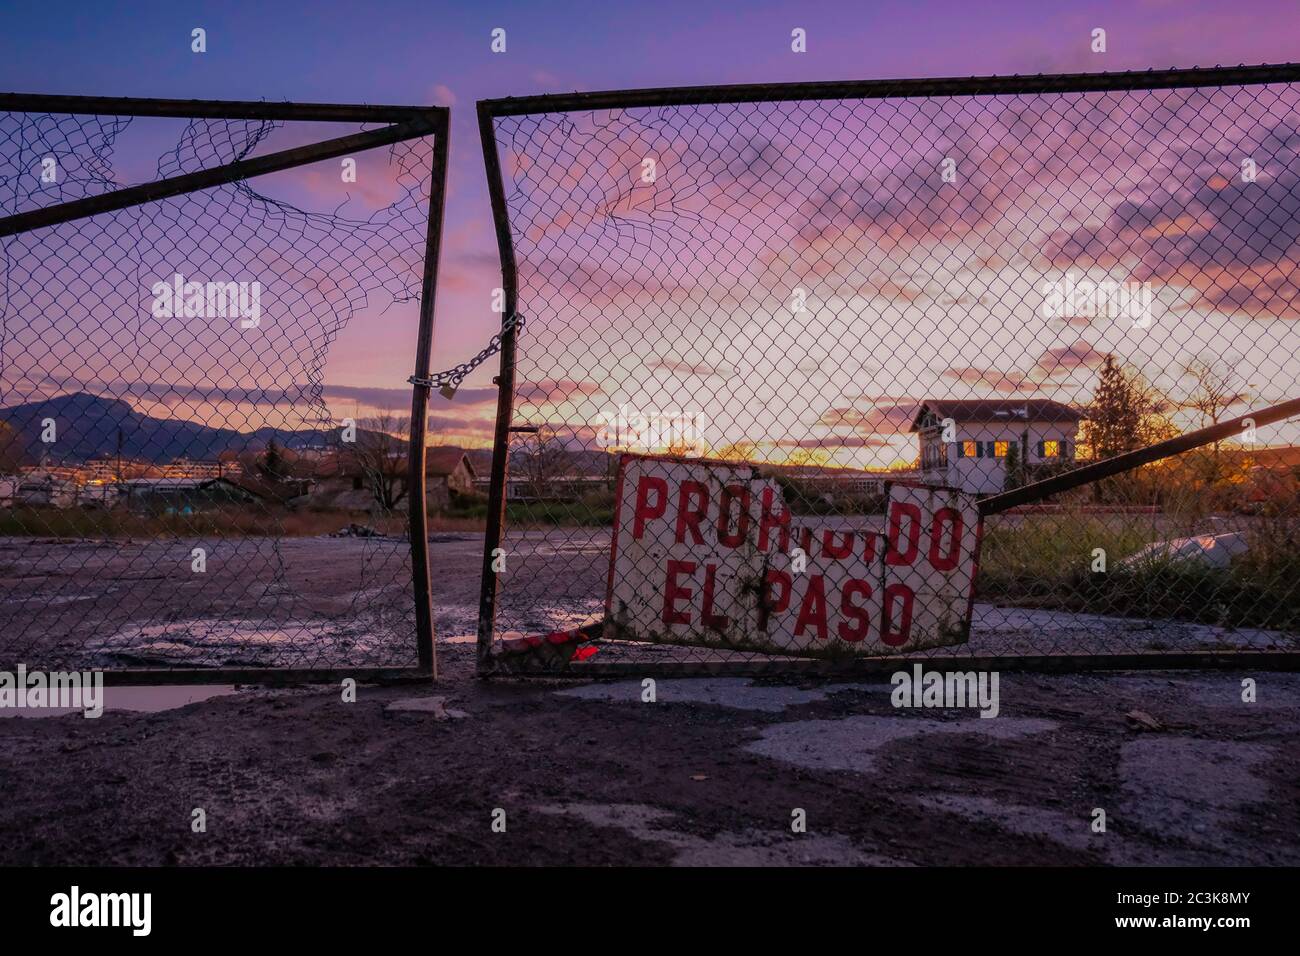 Prohibido el Paso sign on an old fence during sunset Stock Photo